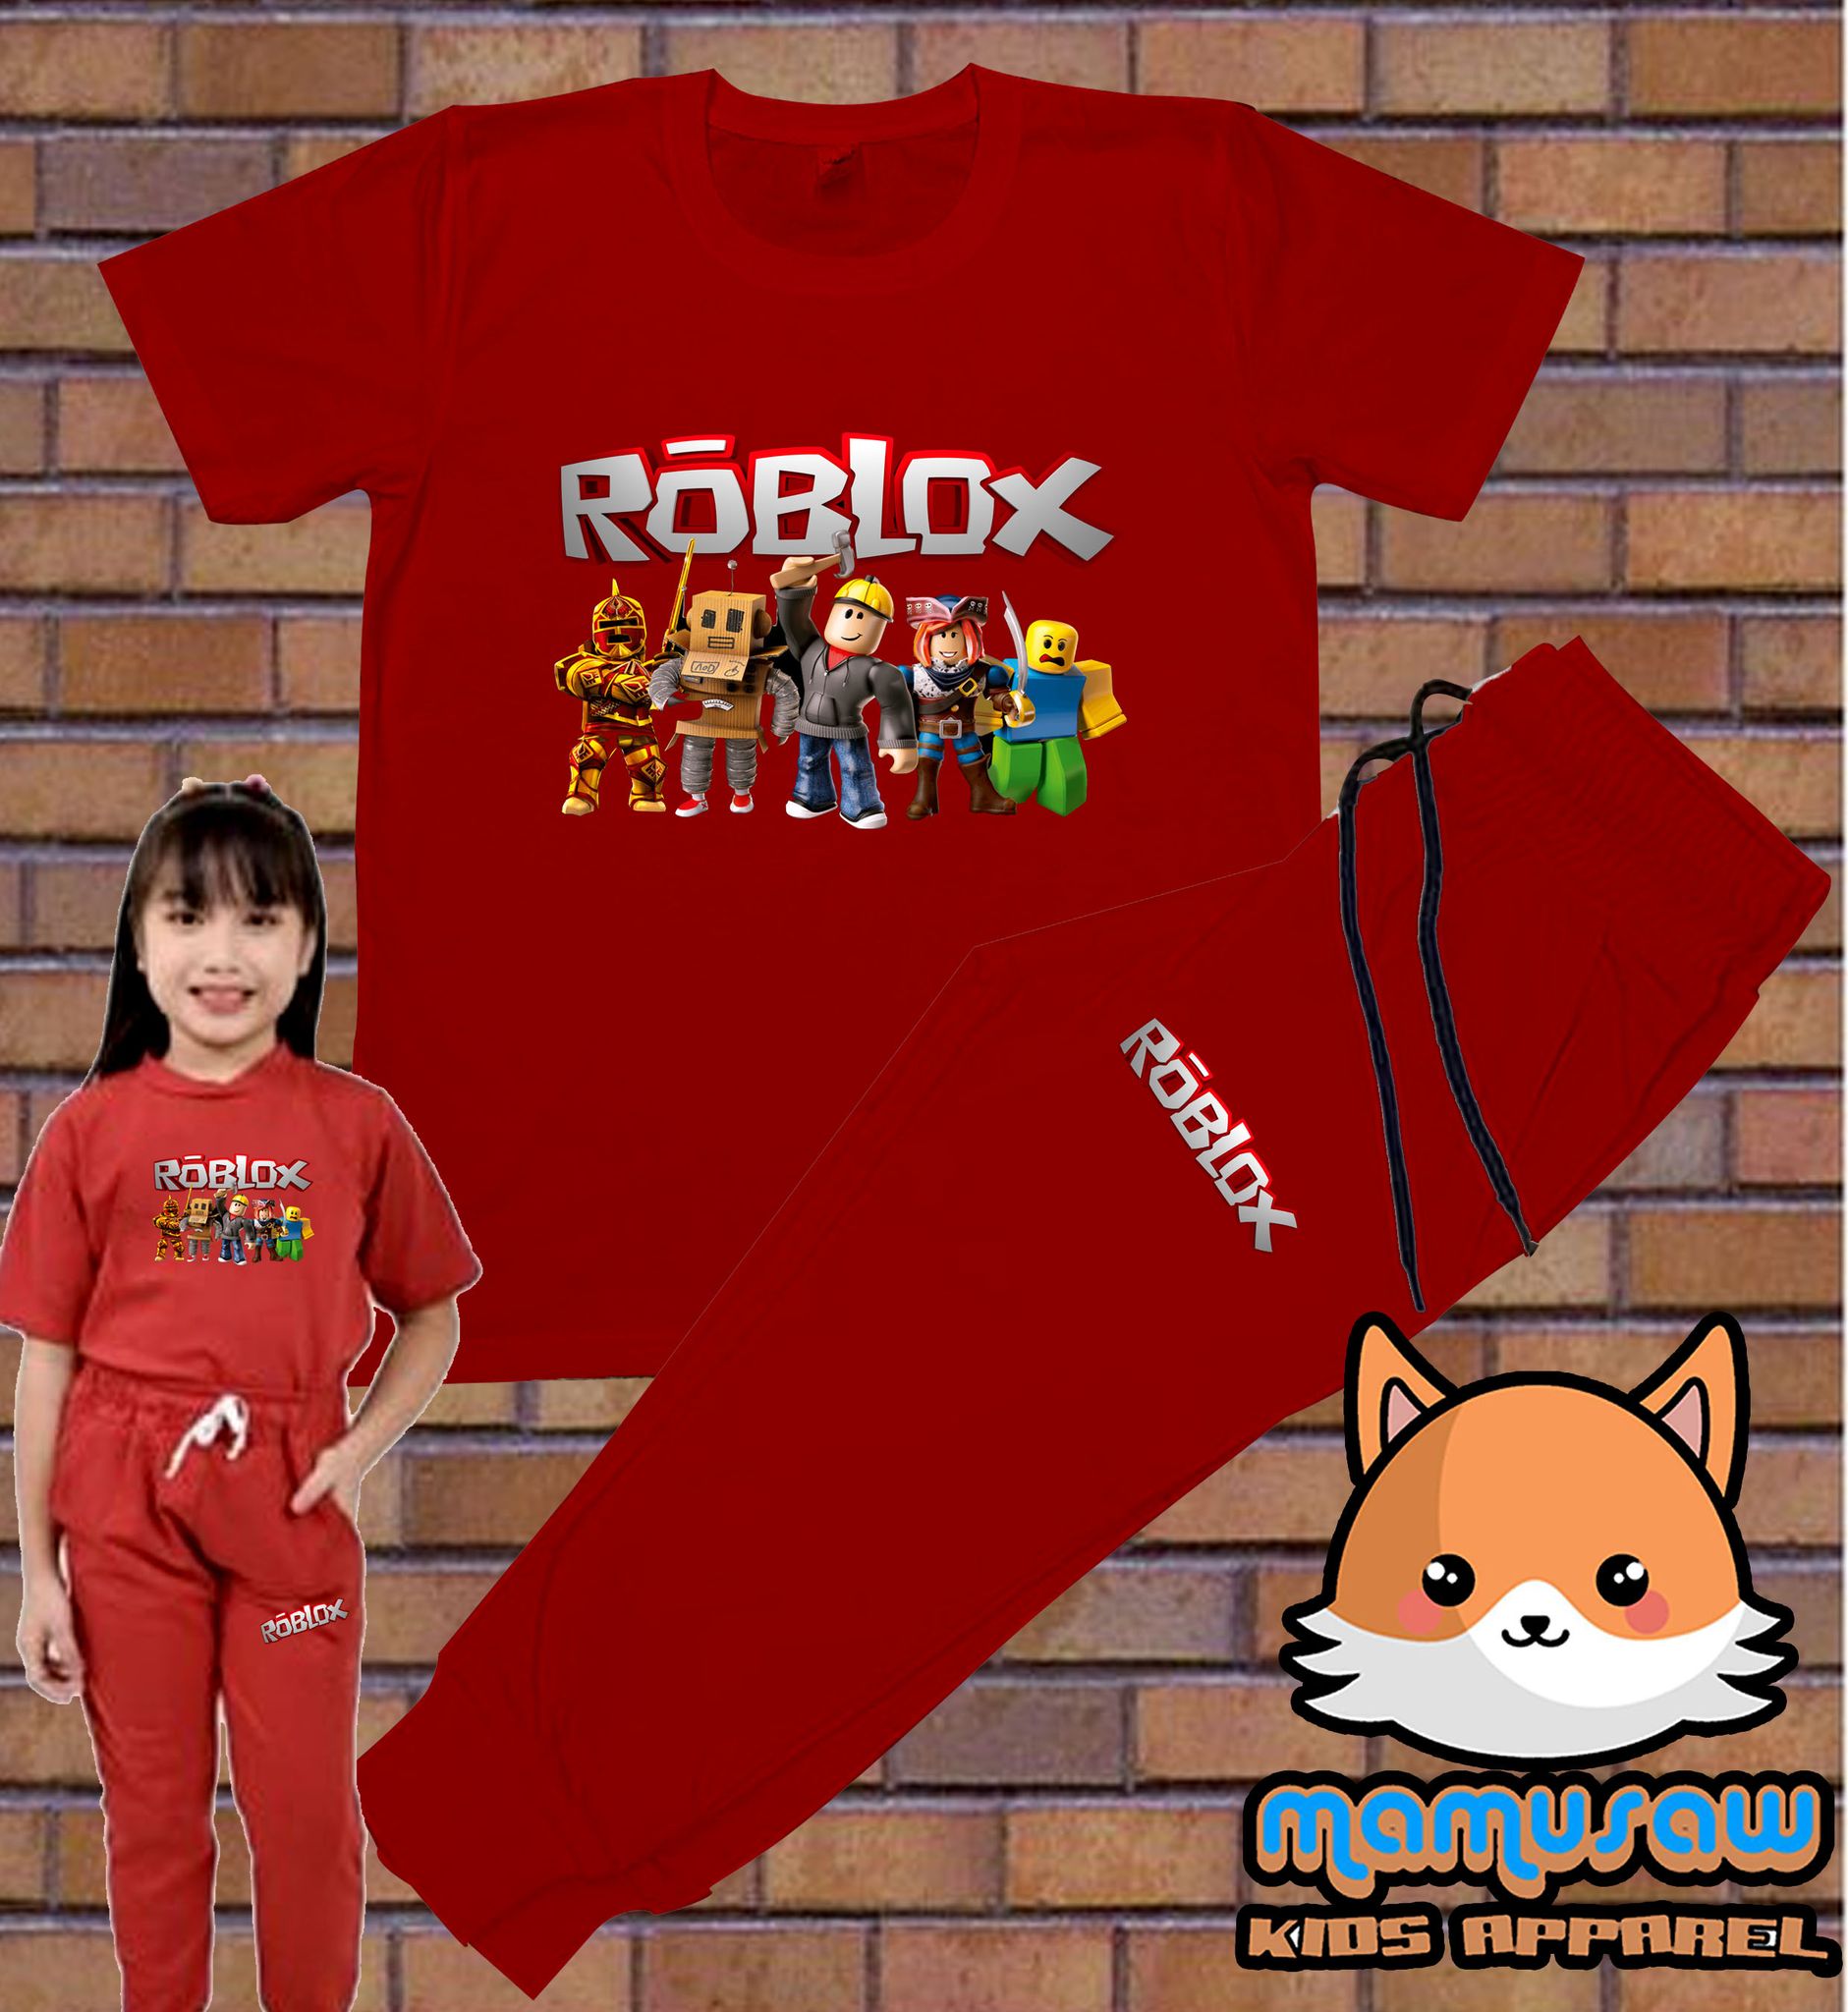 Terno jogger tshirt Roblox Quality cotton 3-10 yrs old sizes, Babies &  Kids, Babies & Kids Fashion on Carousell